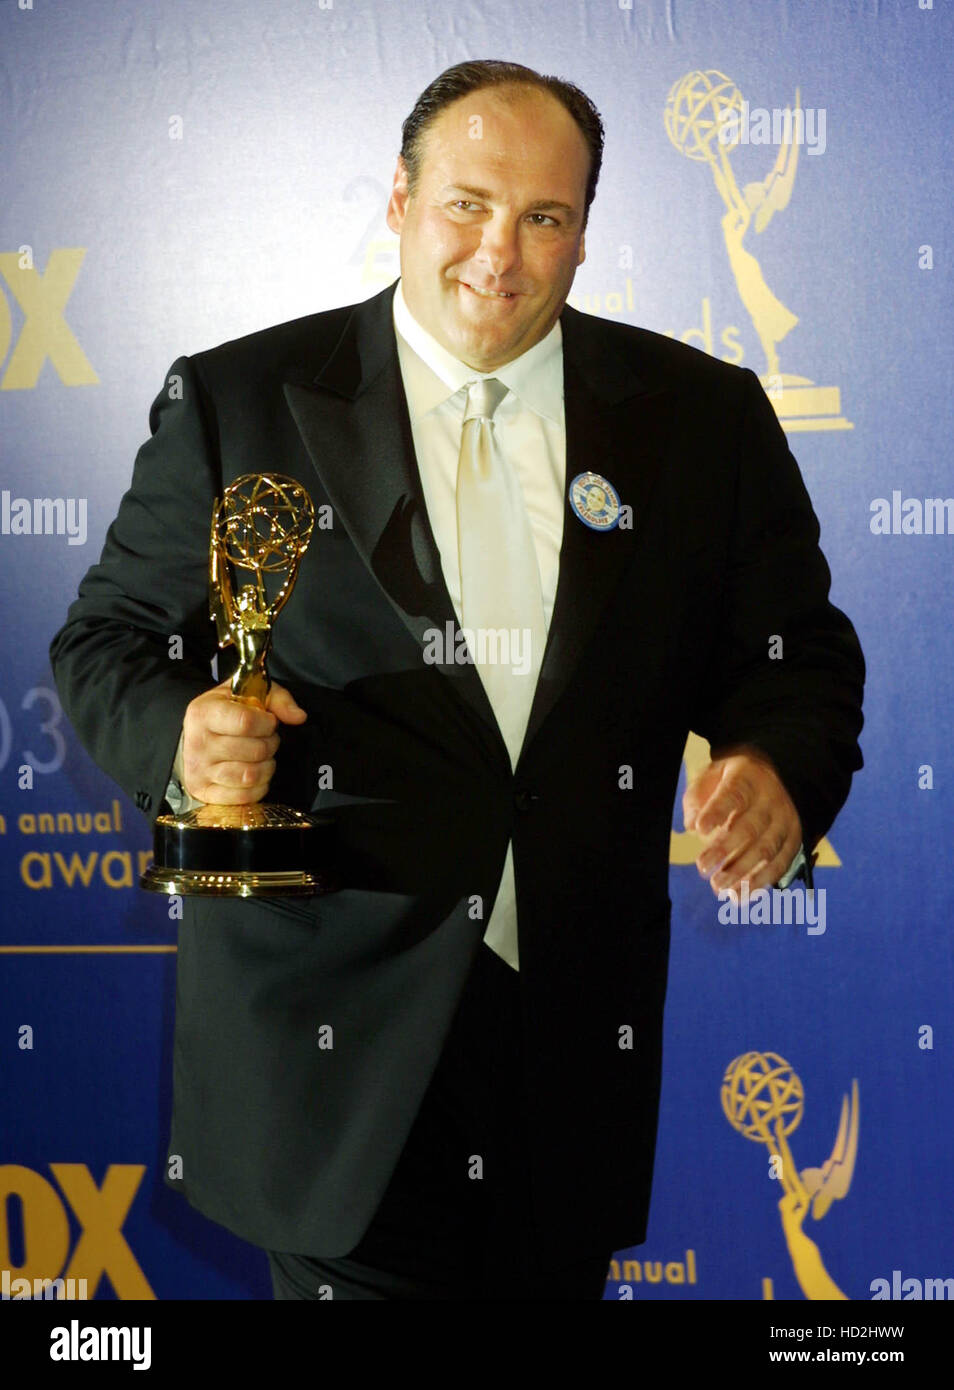 Actor James Gandolfini holds his award for outstanding lead actor in a drama series, 'The Sopranos' at the 55th Annual Primetime Emmy Awards held at  the Shrine Auditorium in Los Angeles on Sunday, 21 September 2003. Francis Specker Stock Photo